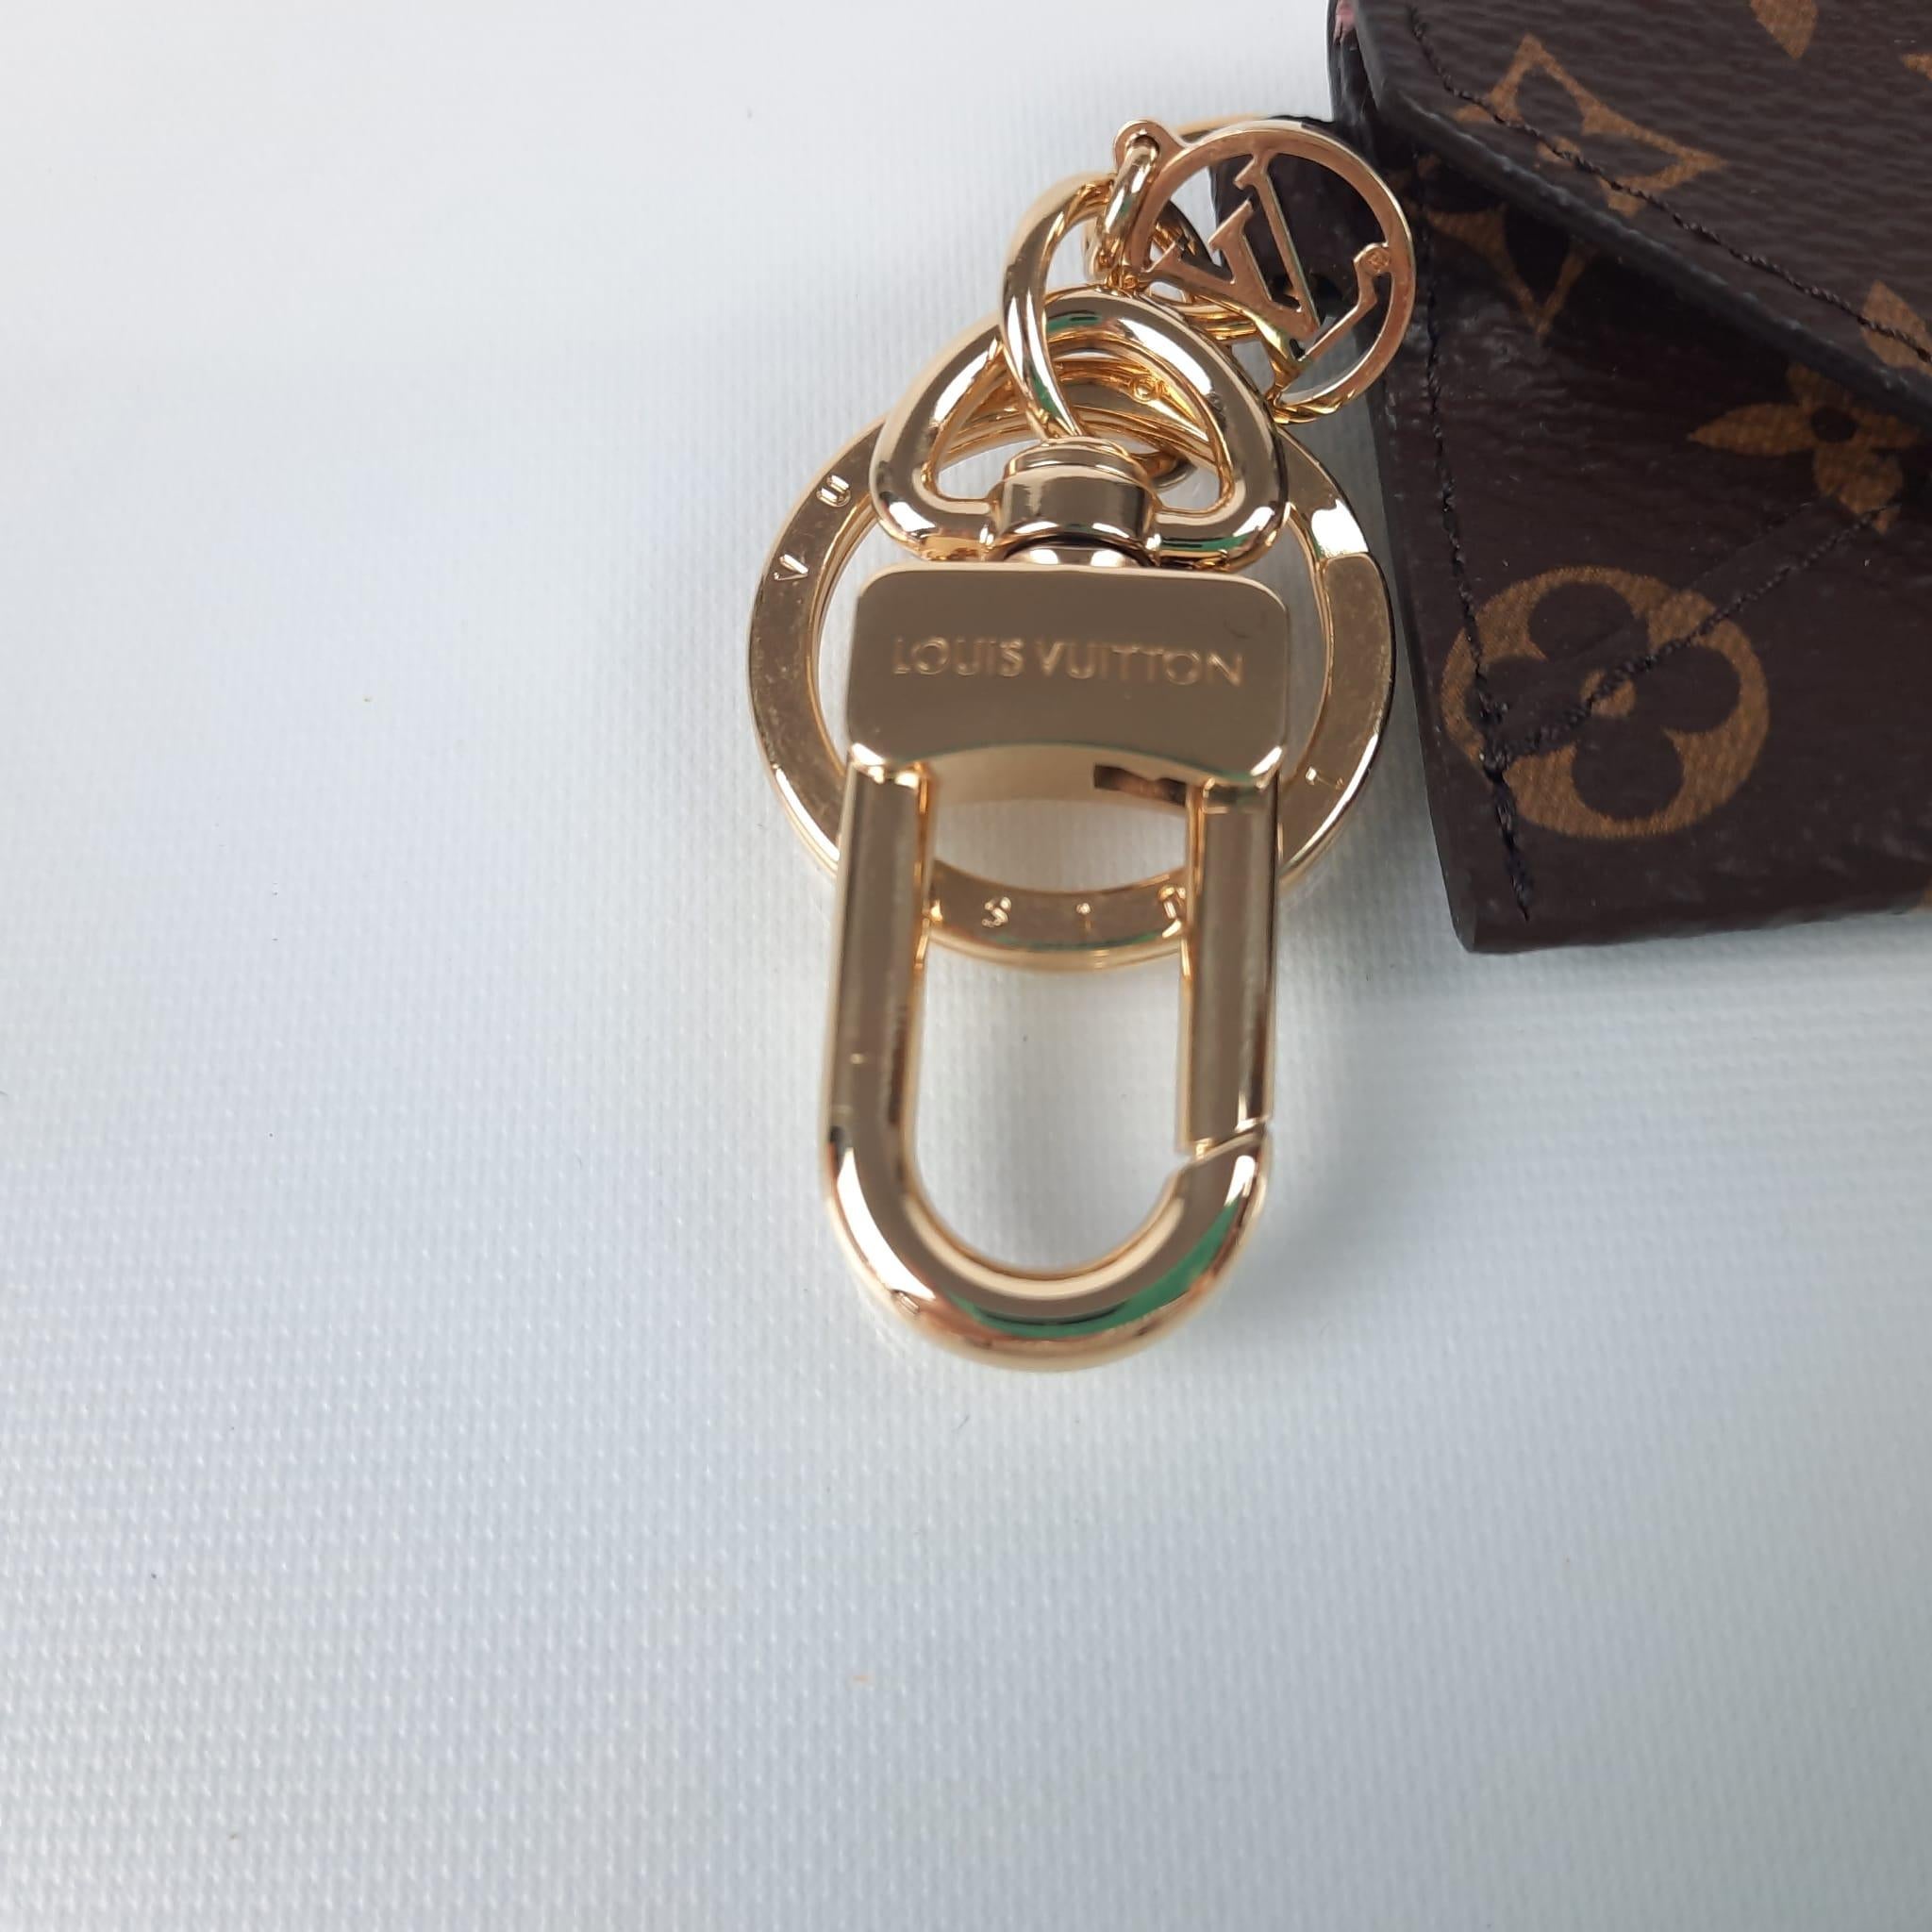 Louis Vuitton Bag charm and Kirigami pouch key ring monogram For Sale 1